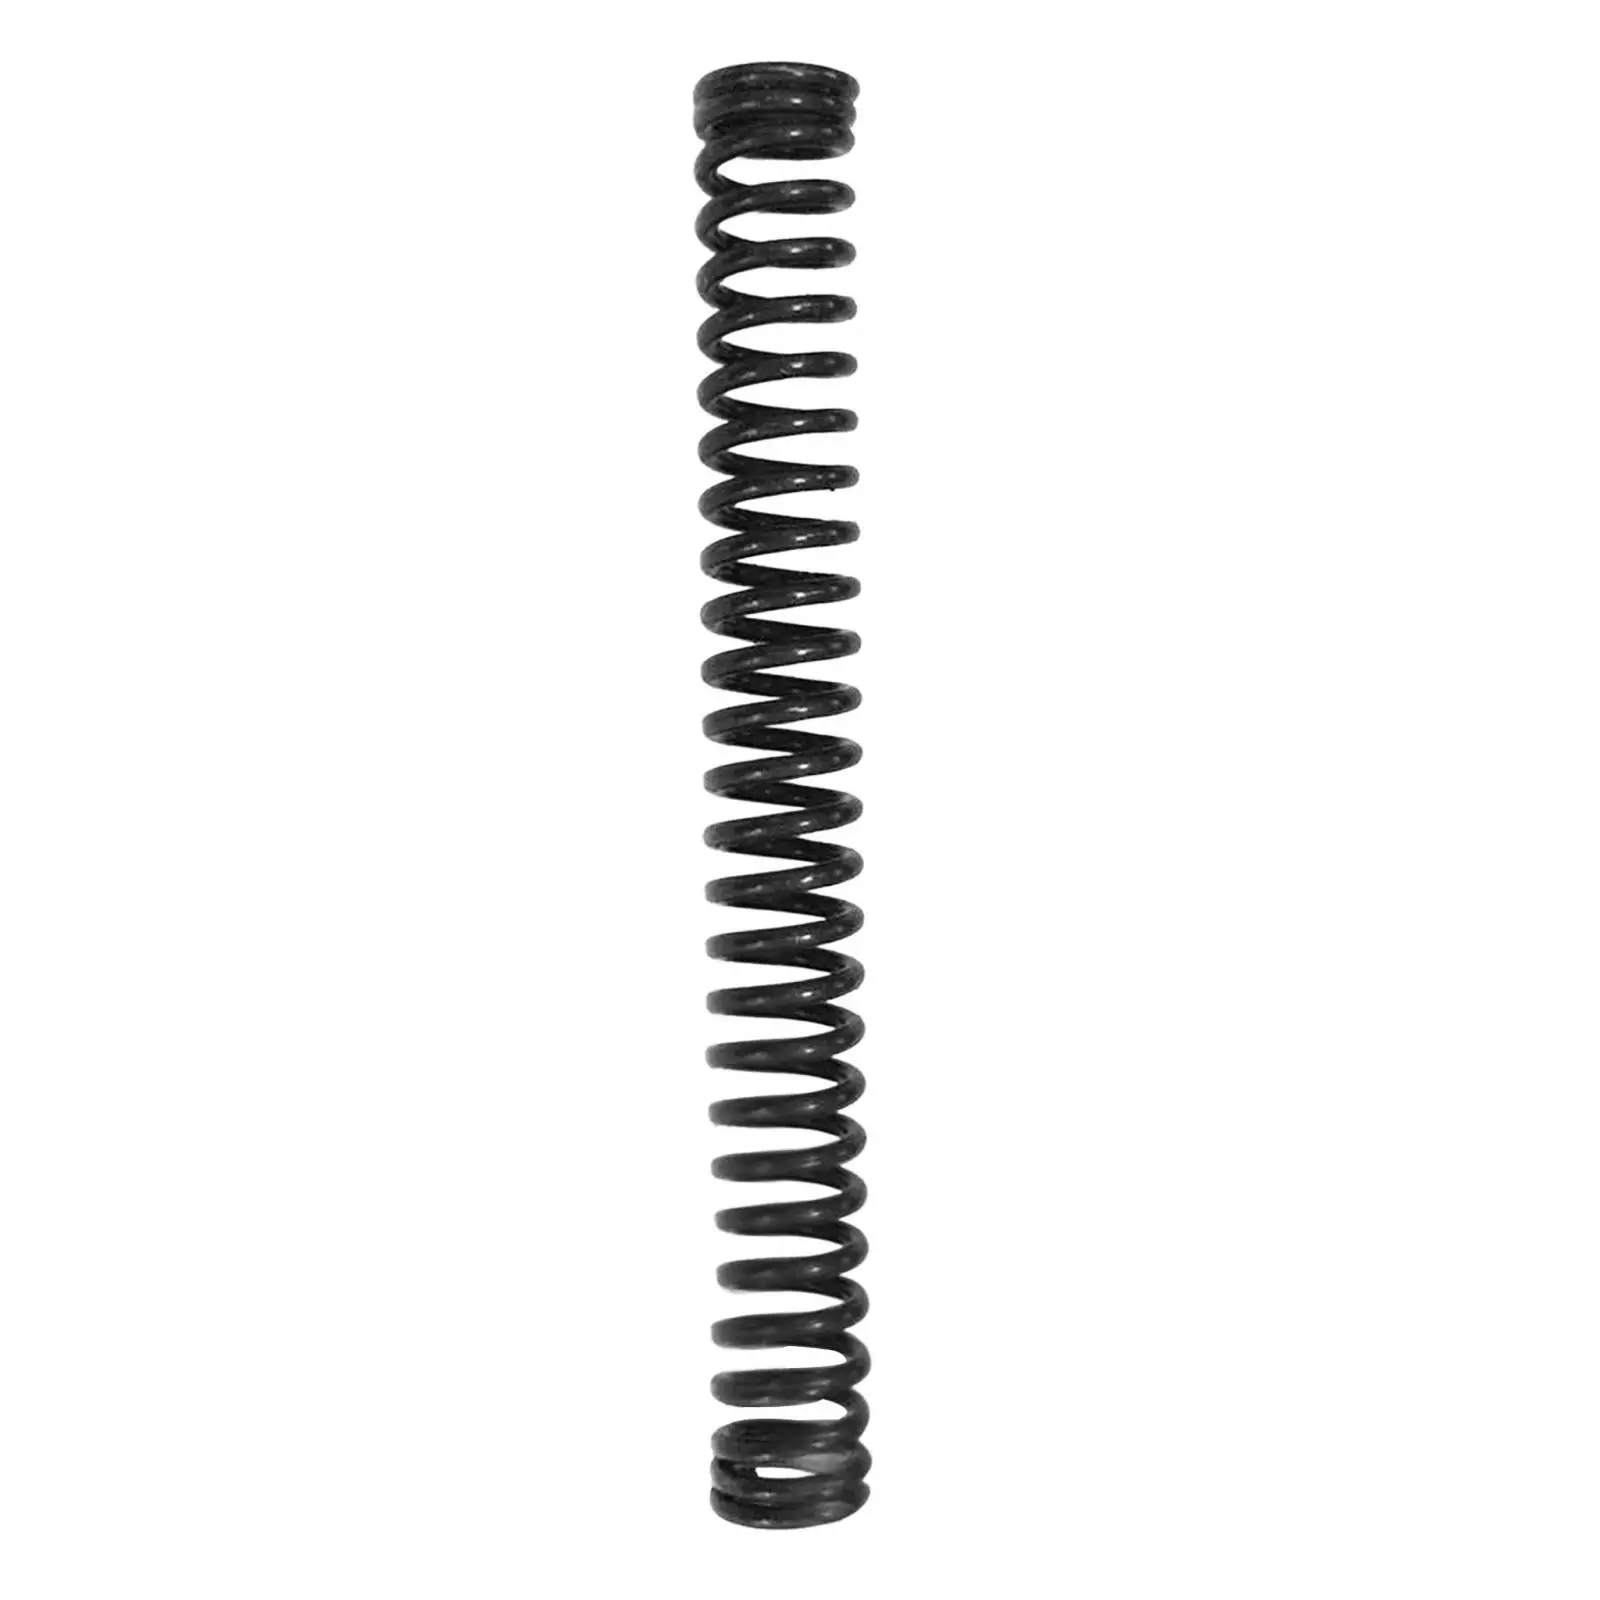 Clutch Coil Spring 3B264-2210M 3B2642210 3B2642210M Replaces for Tohatsu Wear Resistance Professional Easily Install Black